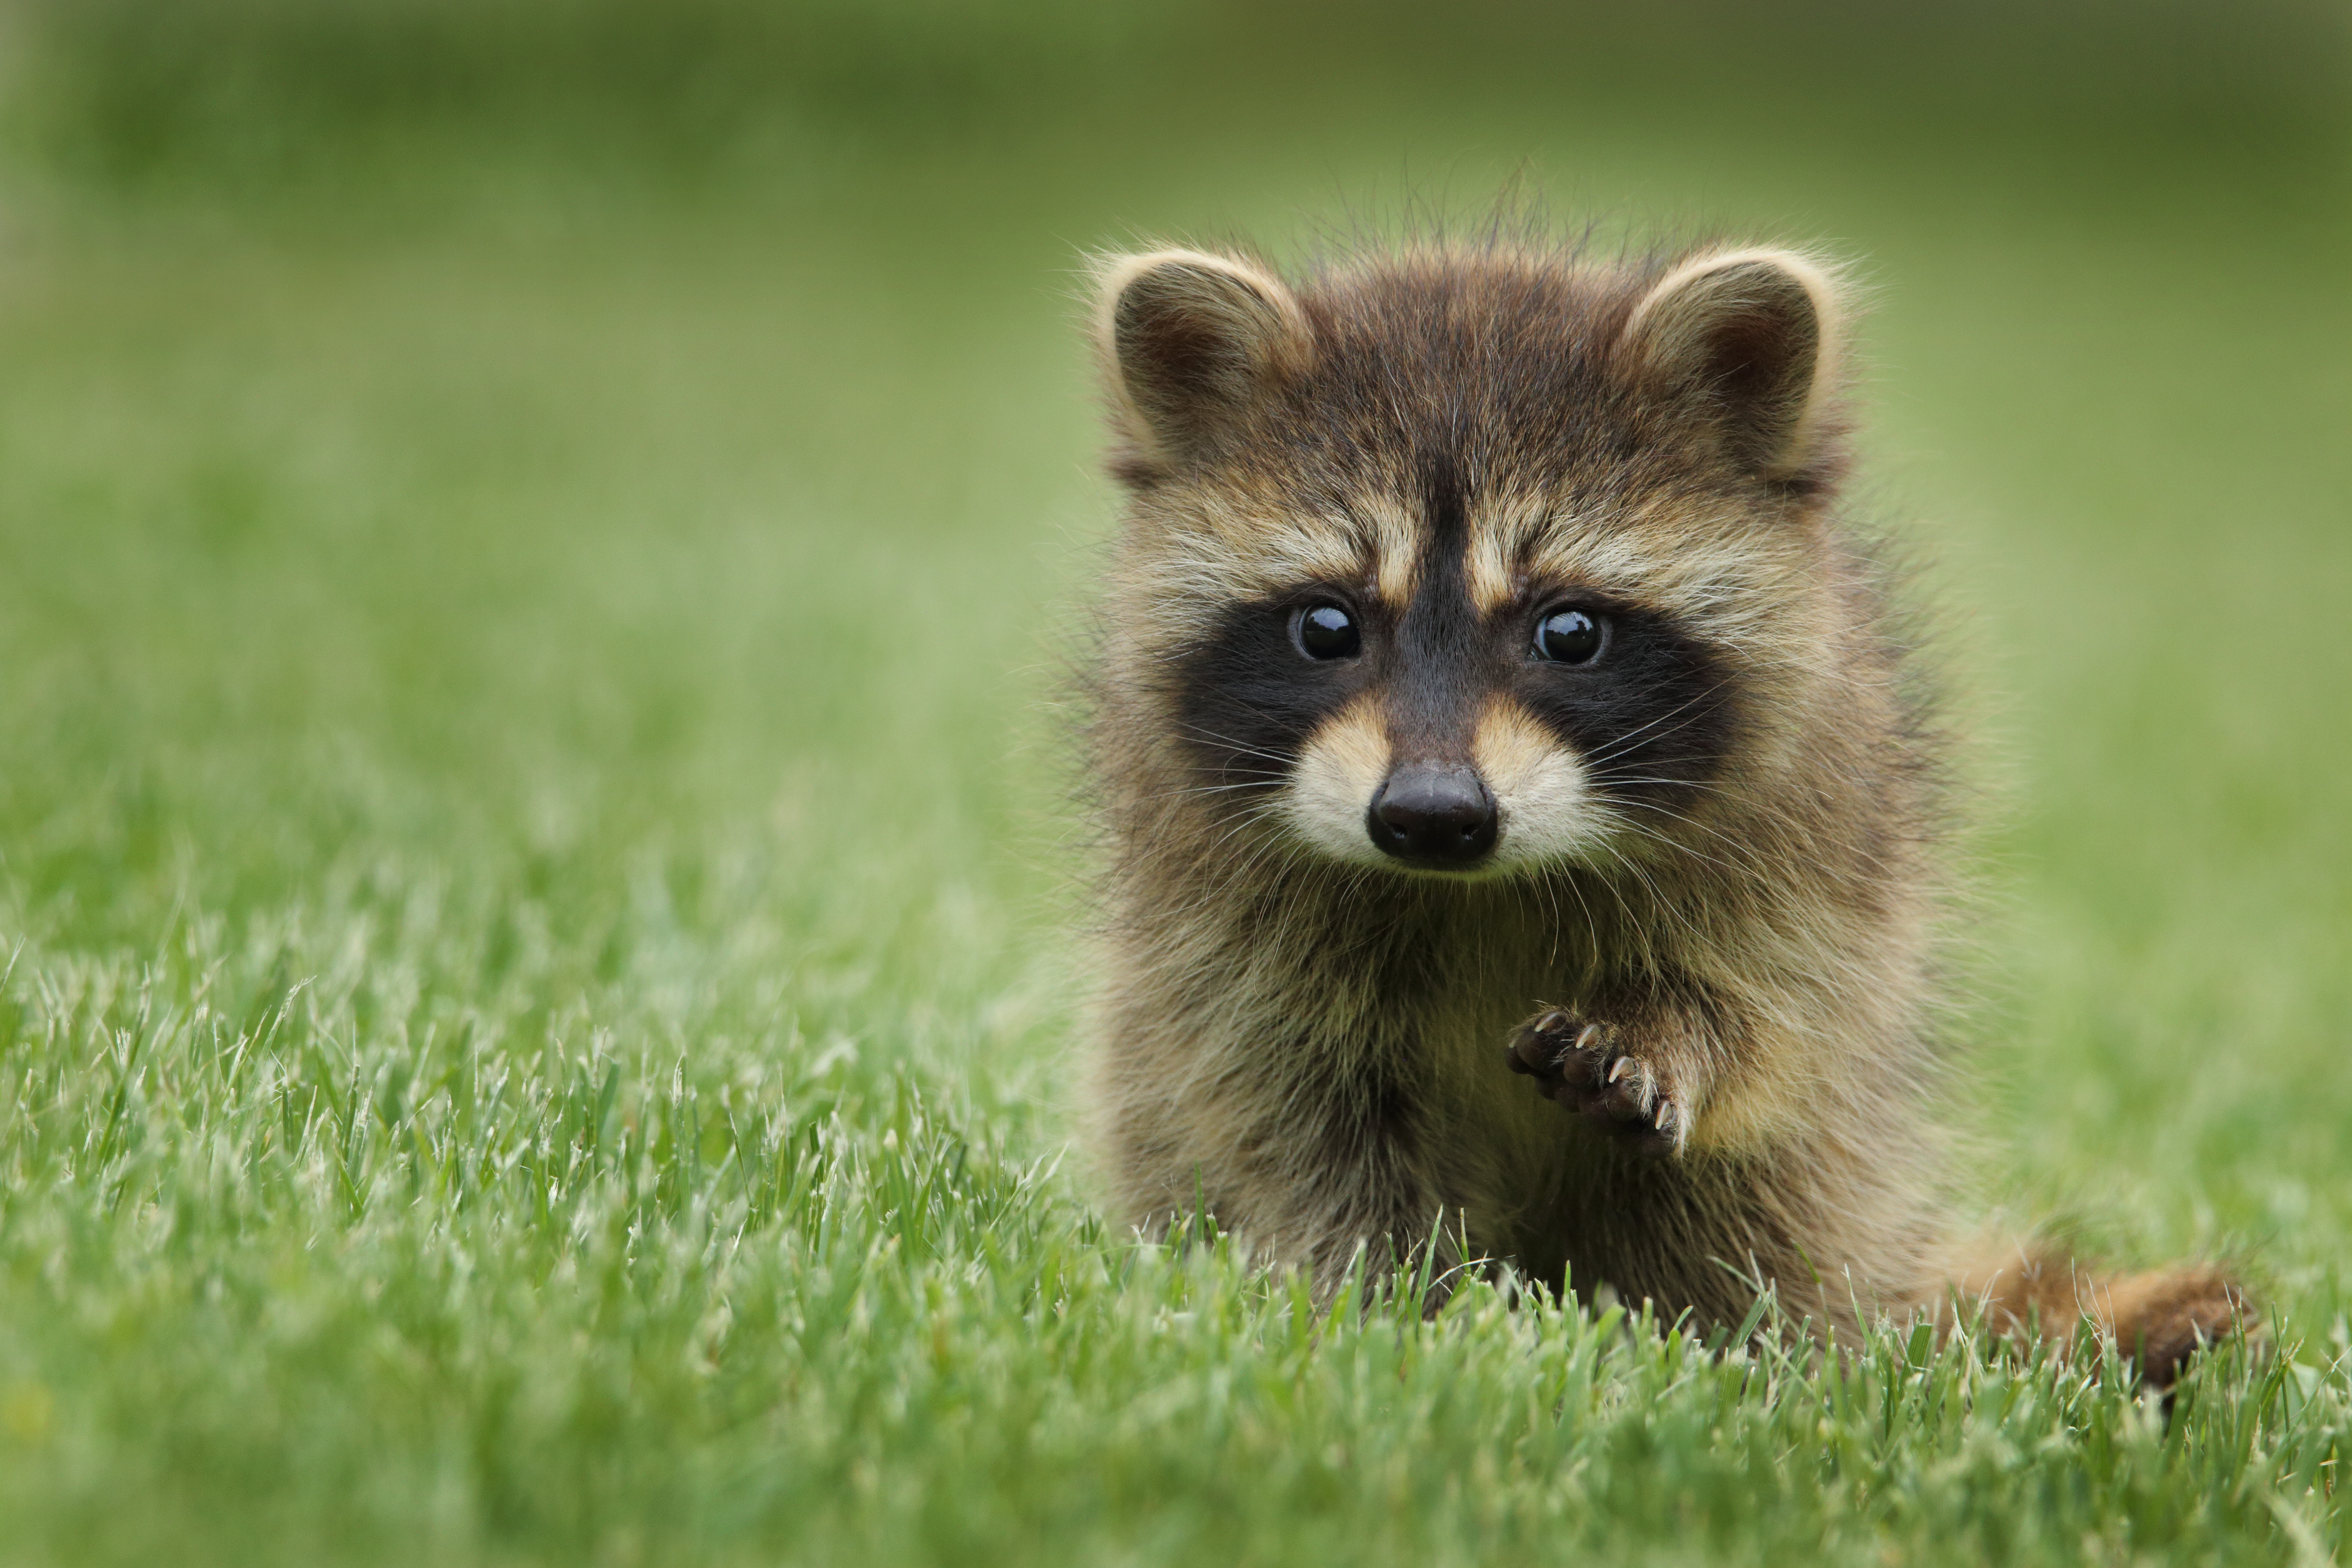 110752 download wallpaper animal, animals, grass, muzzle, stroll, raccoon screensavers and pictures for free